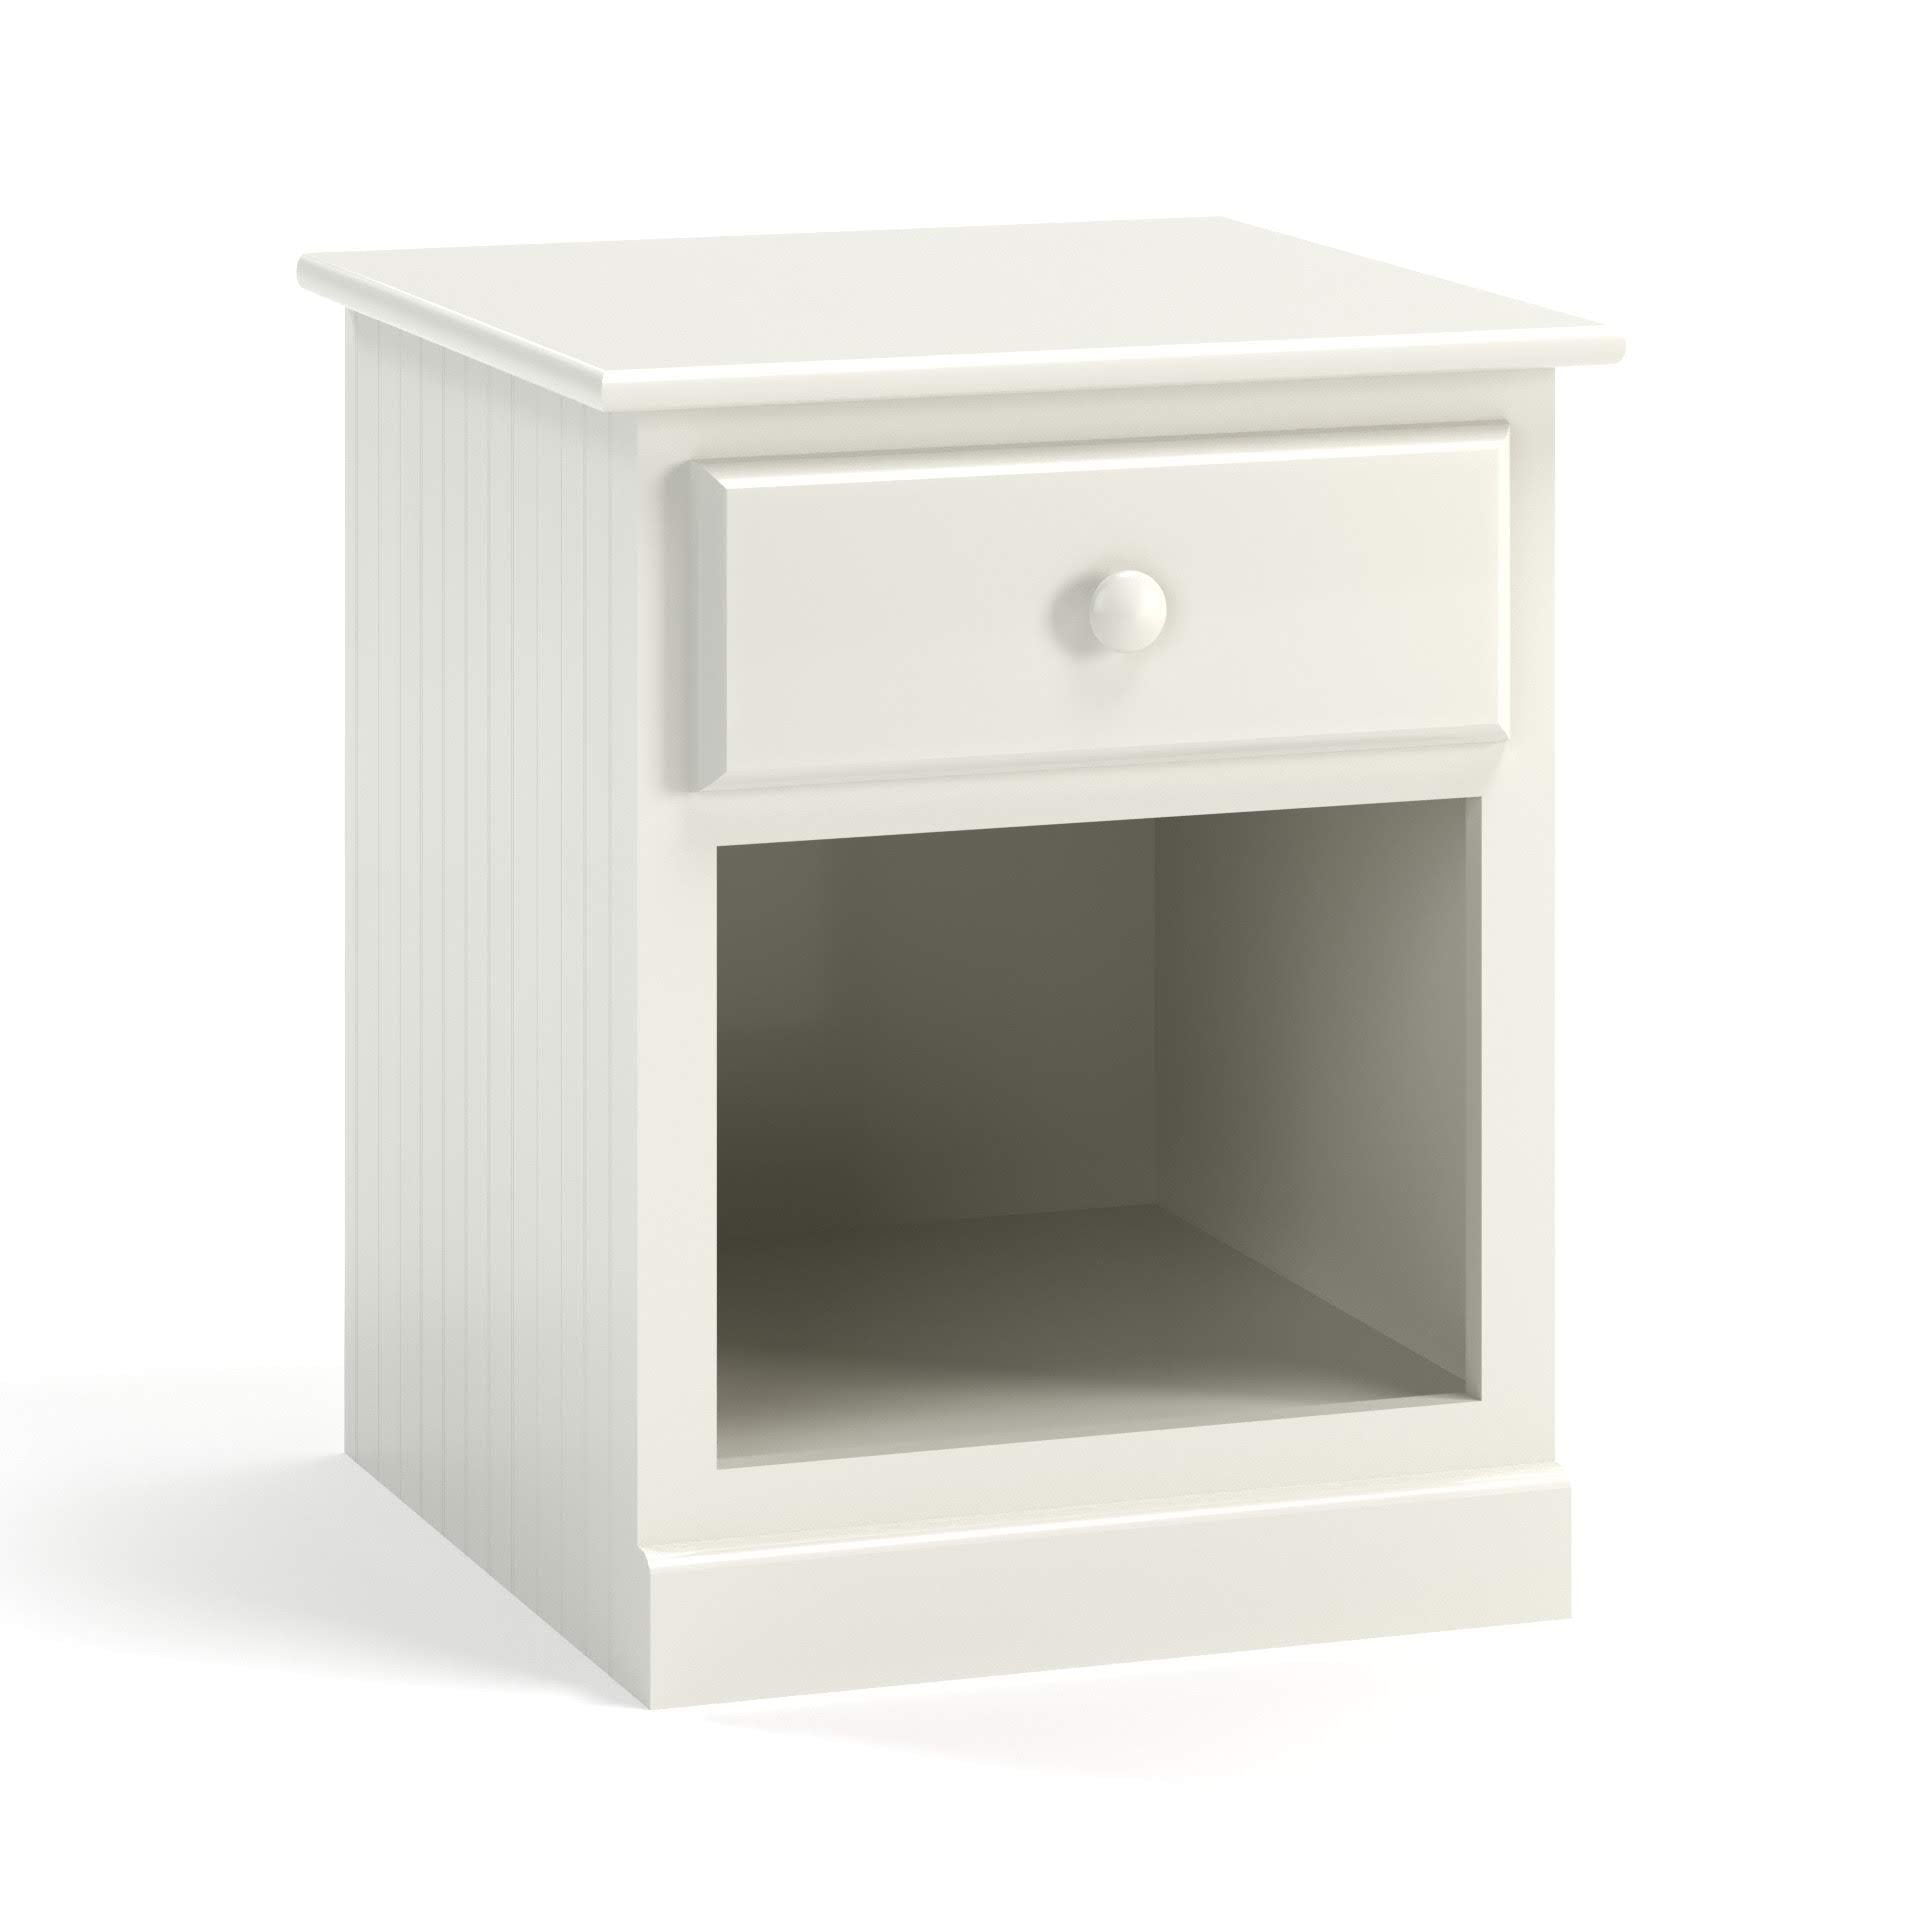 A birch single drawer nightstand, with full extension glides and a single cubby space. It is painted white and has bead board sides.